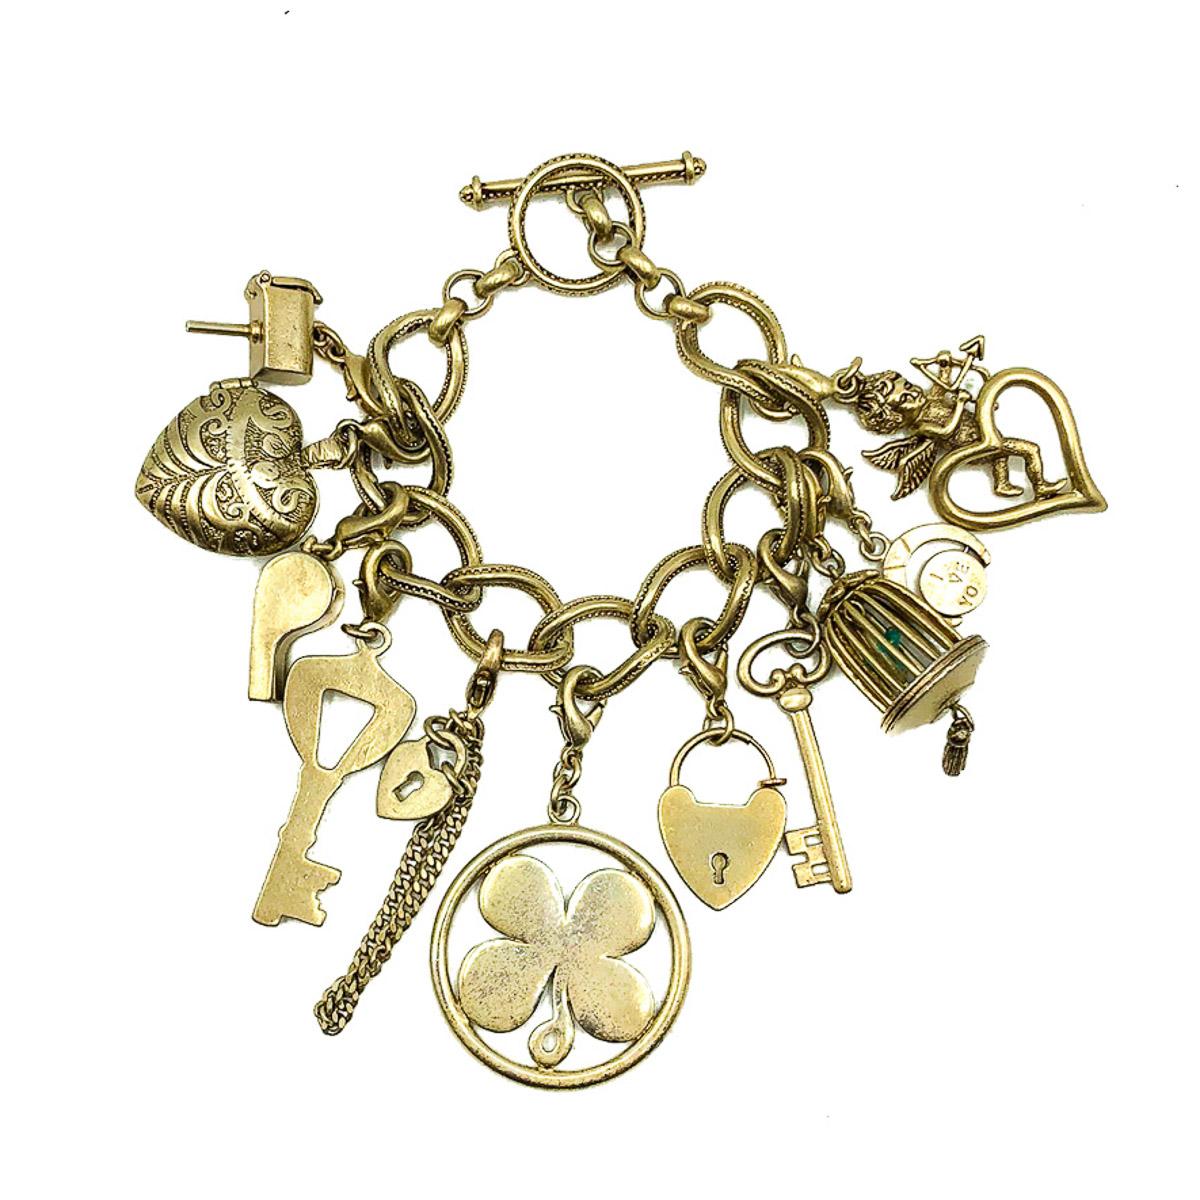 A stand out Vintage Monet Charm Bracelet. Created to celebrate Monet Jewelry's 75th anniversary. Crafted in a very mellow, antiqued gold plated metal. Featuring a myriad of charms, eleven in total, including many denoting good luck and romance and